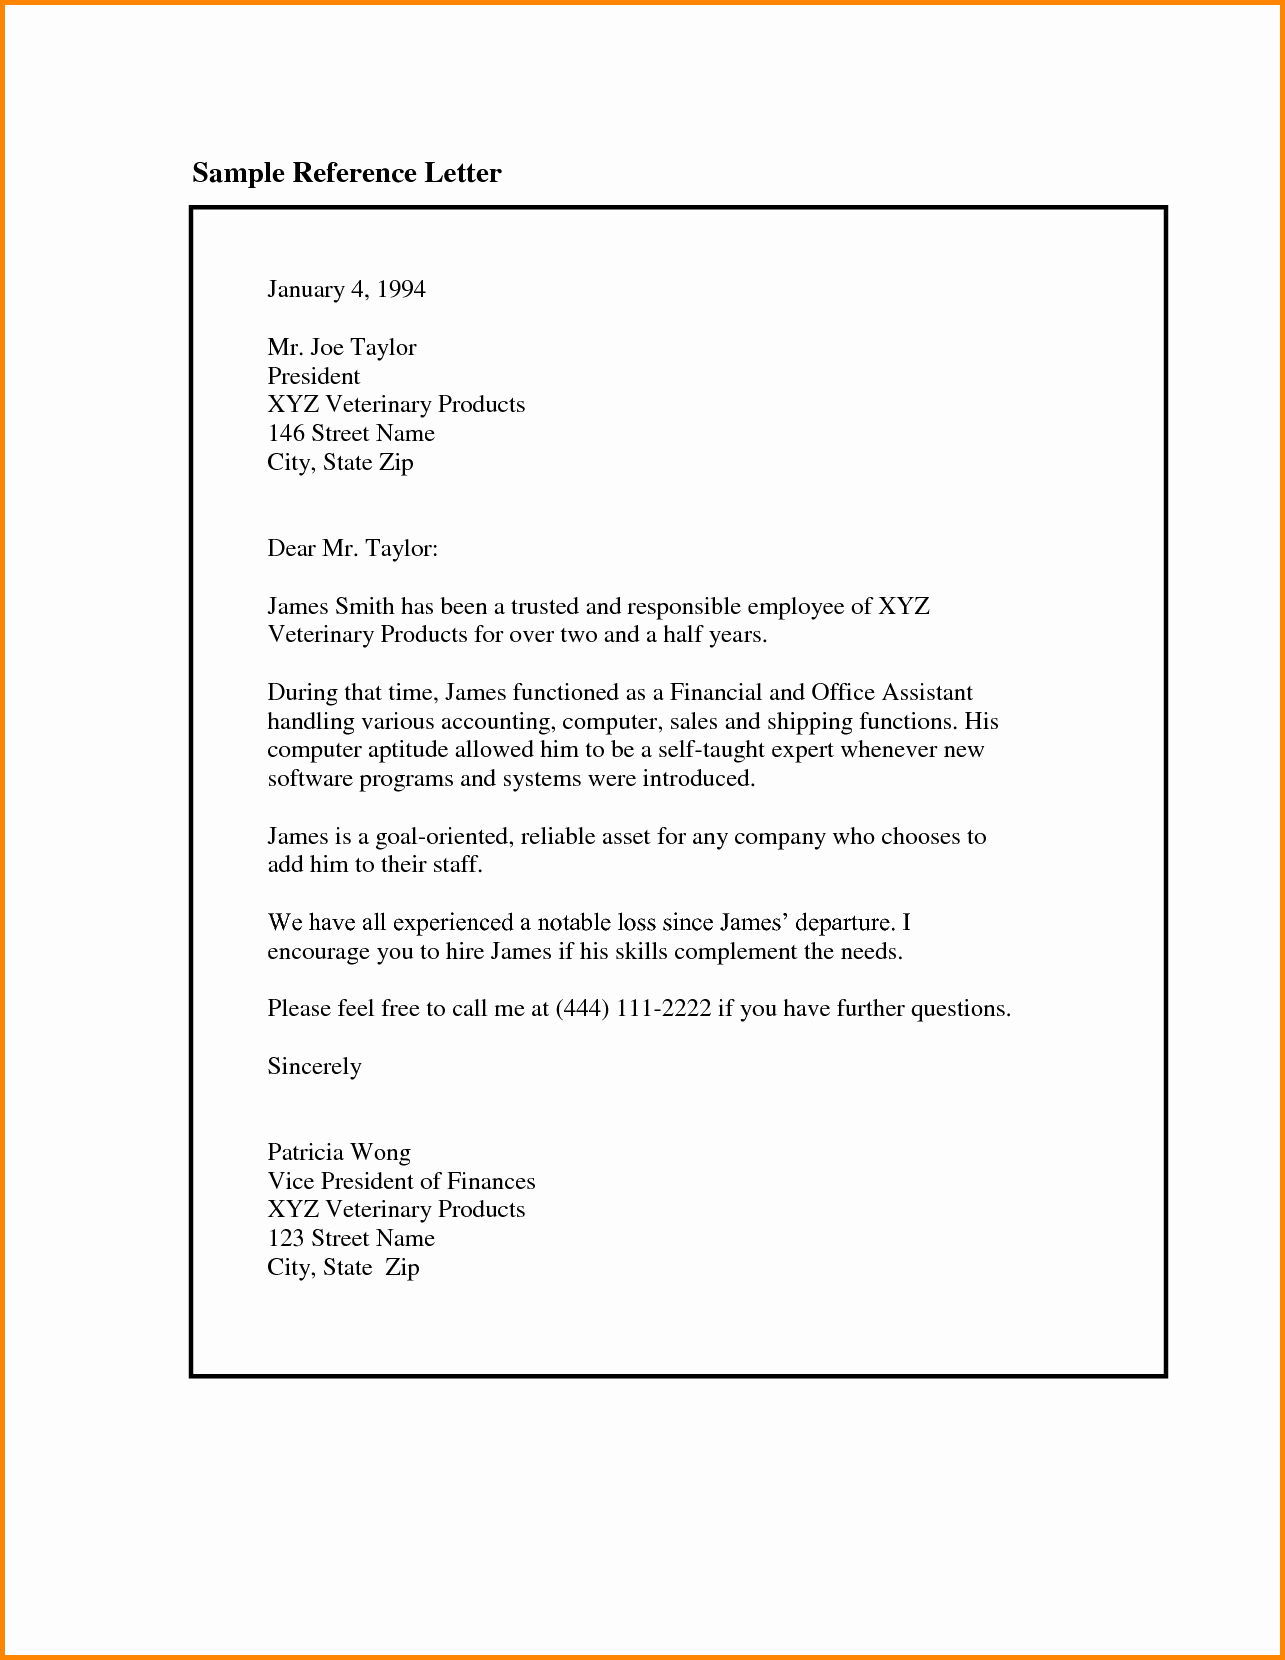 Reference Letter for Employee Template Inspirational Search Results for “employee Reference Letter Template